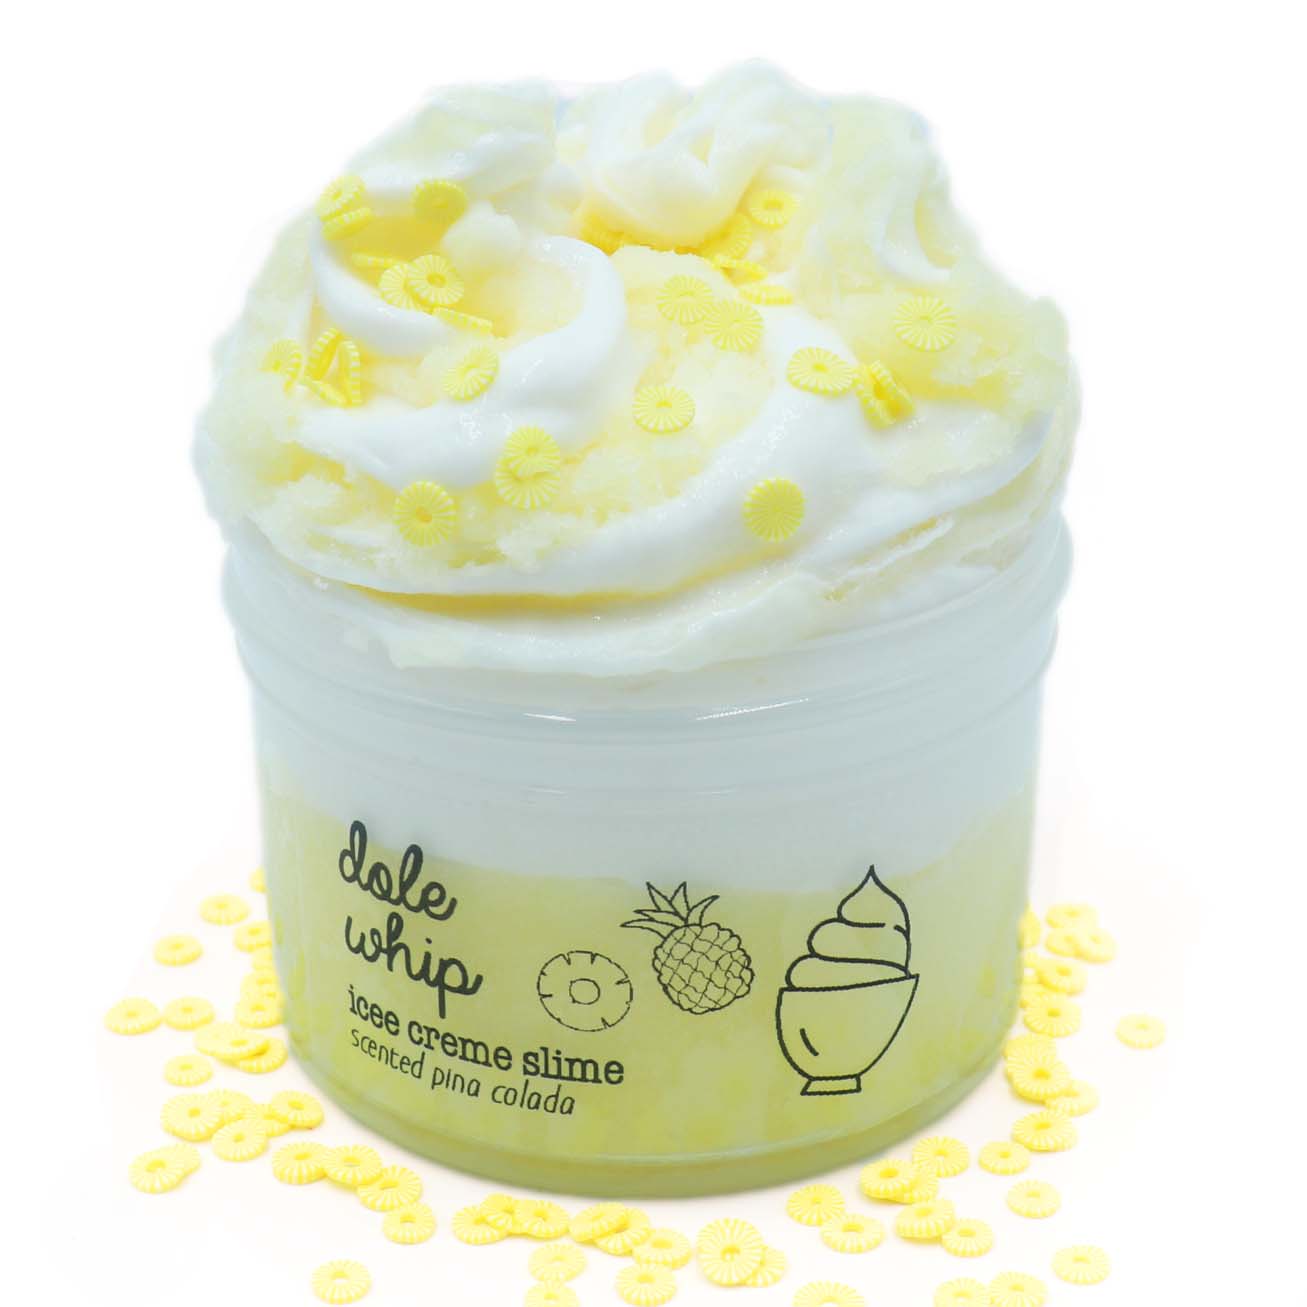 Dole Whip Pineapple Pina Colada White Yellow Sprinkles Layered Icee Butter Creamy Slime Fantasies Shop 7oz Front View